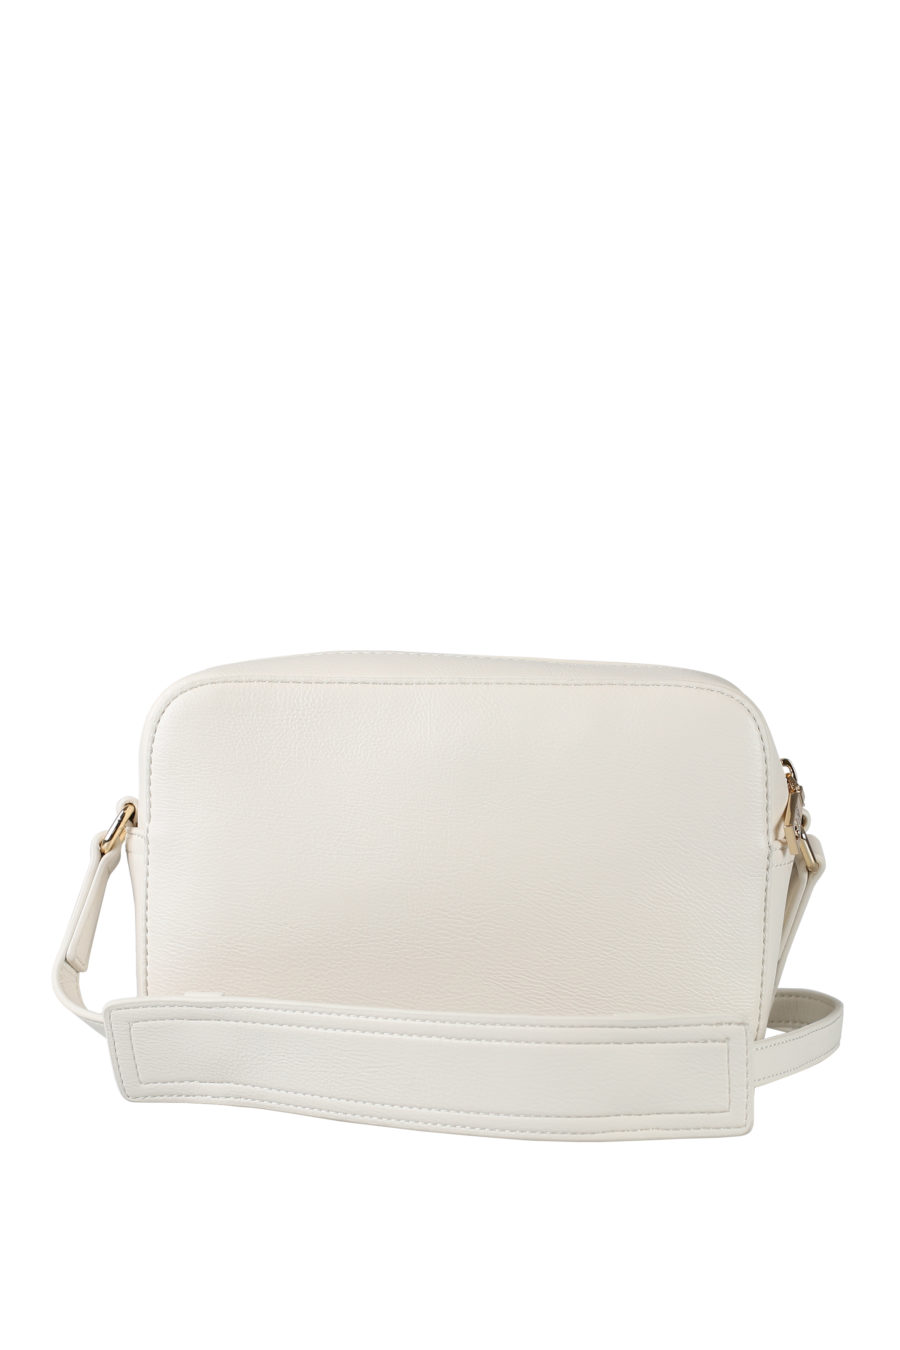 White camera bag with embroidered logo - IMG 1539